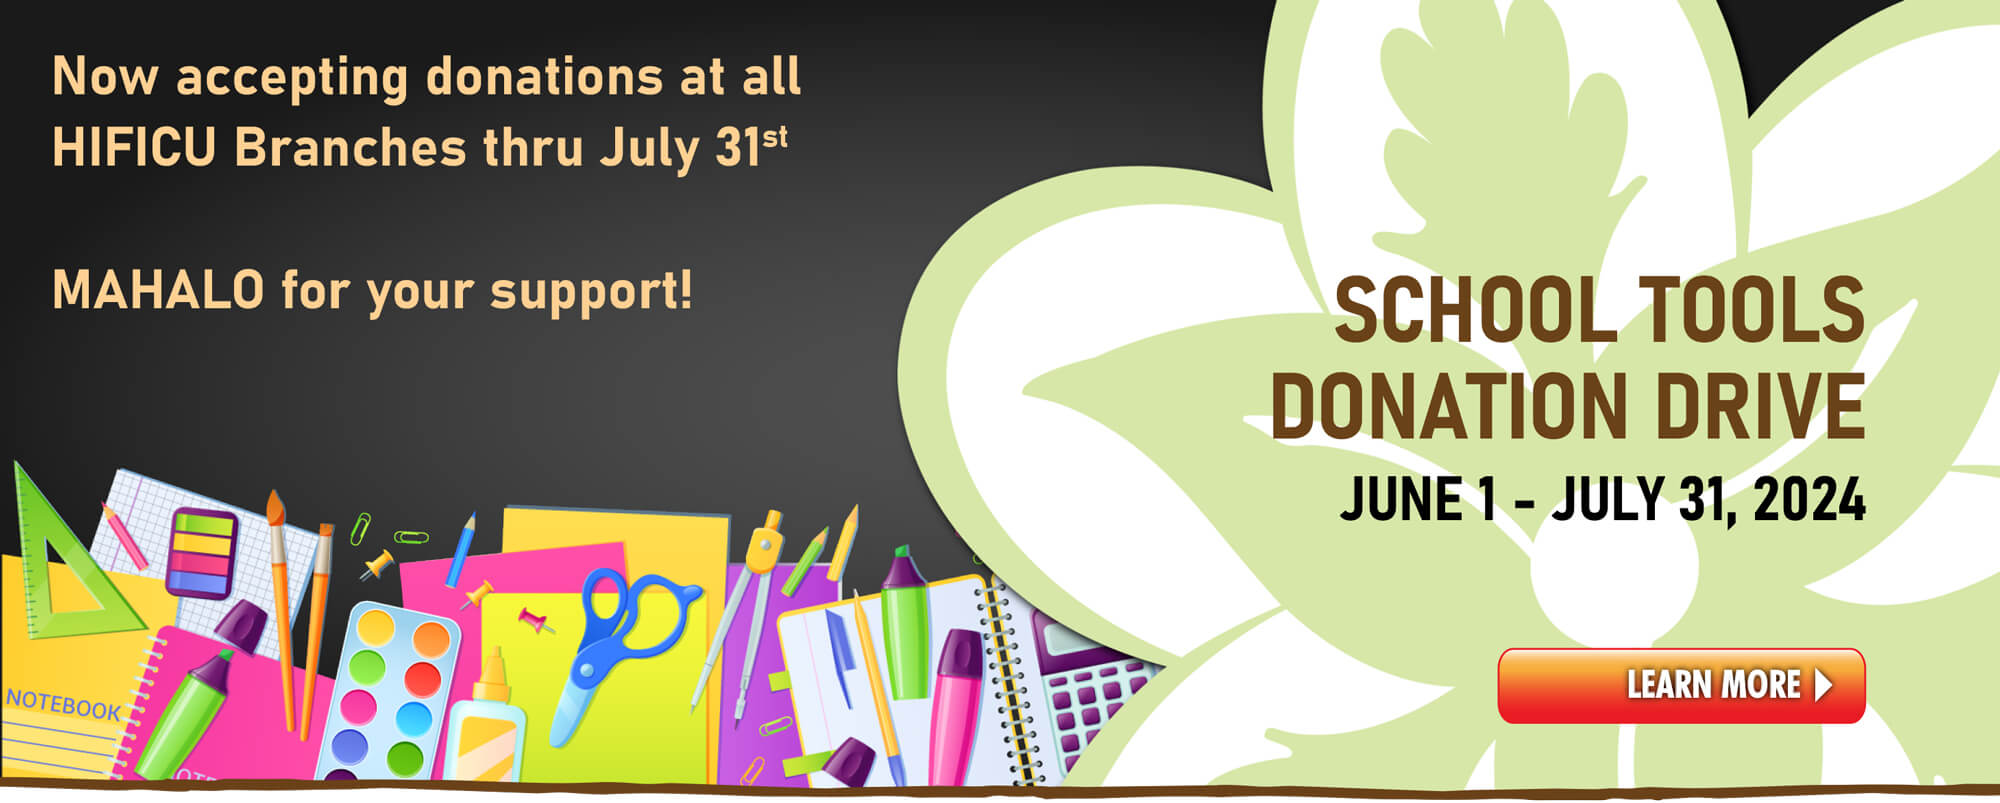 Now accepting donations at all HIFICU Branches thru July 31st. Mahalo for your support. School tools donation drive. June 1 - July 31, 2024. Learn More